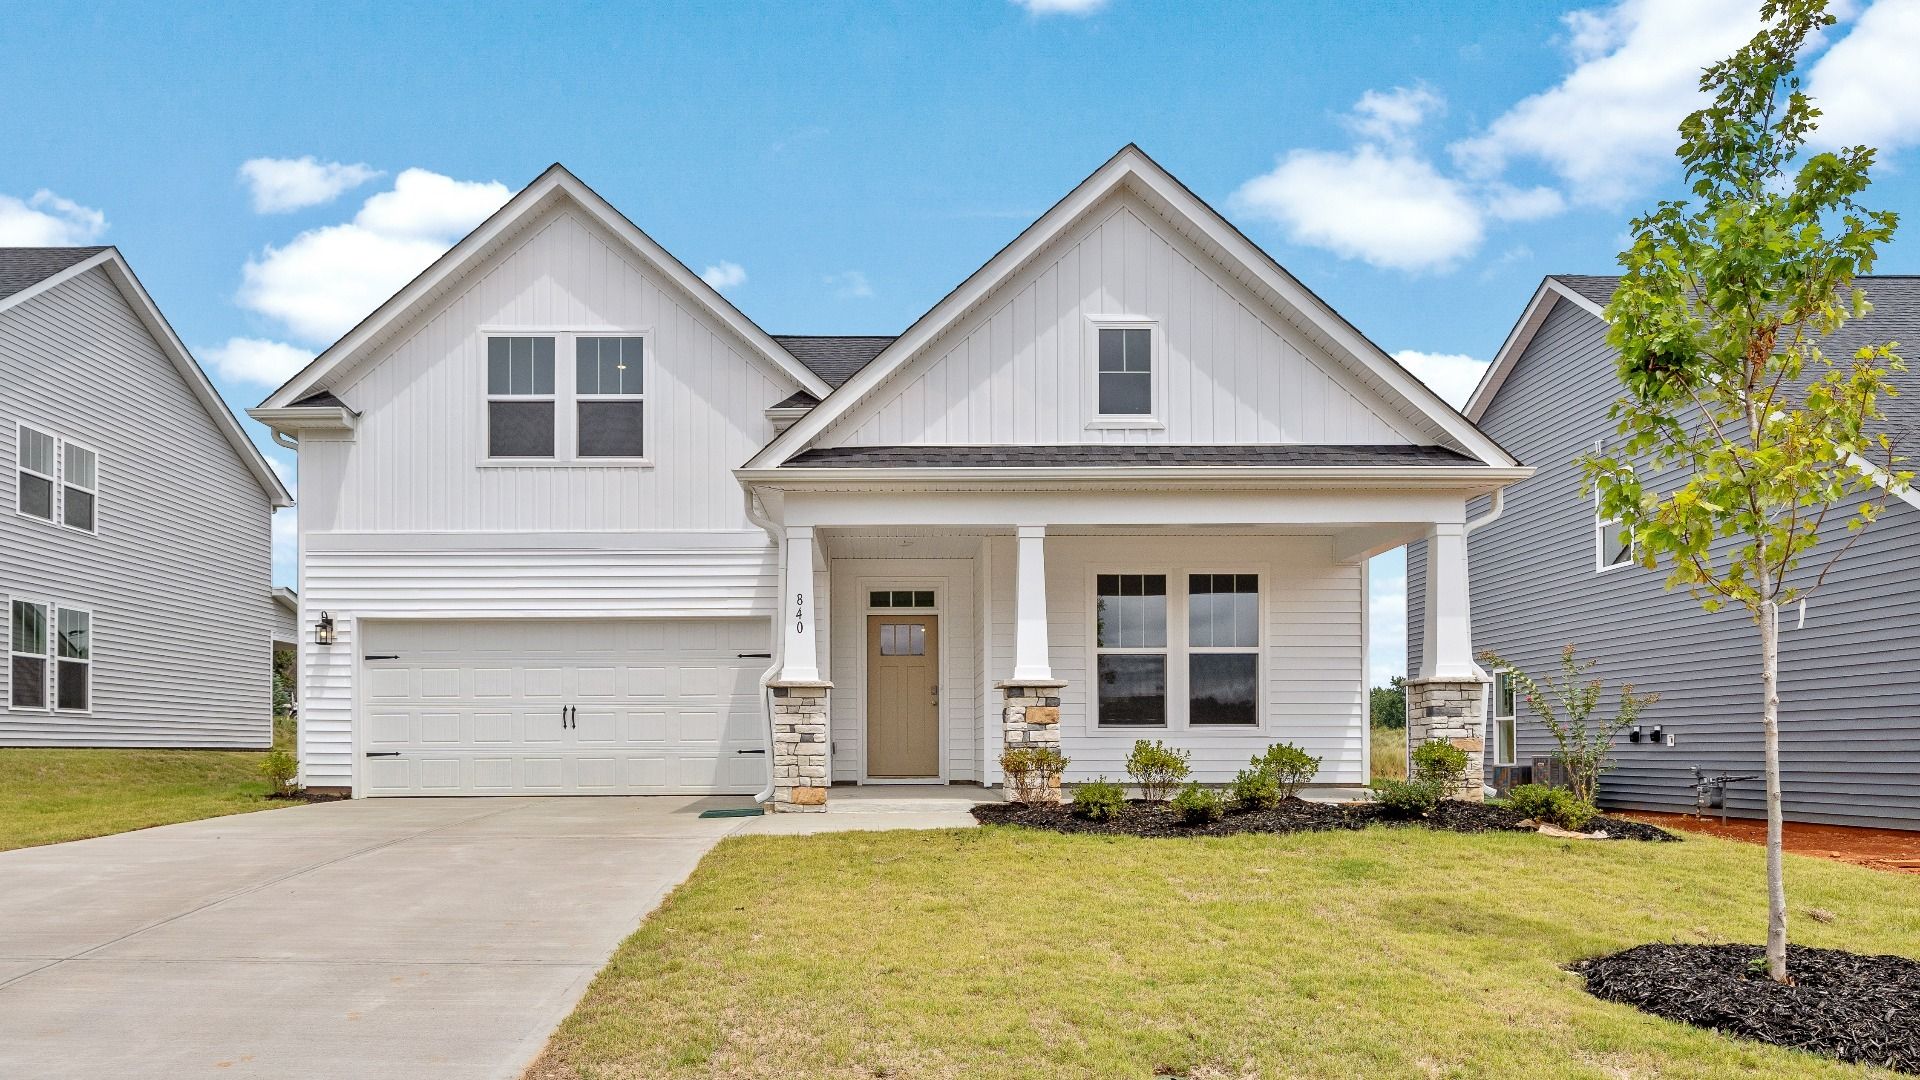 Cooper 3:New homes in Boiling Springs, SC